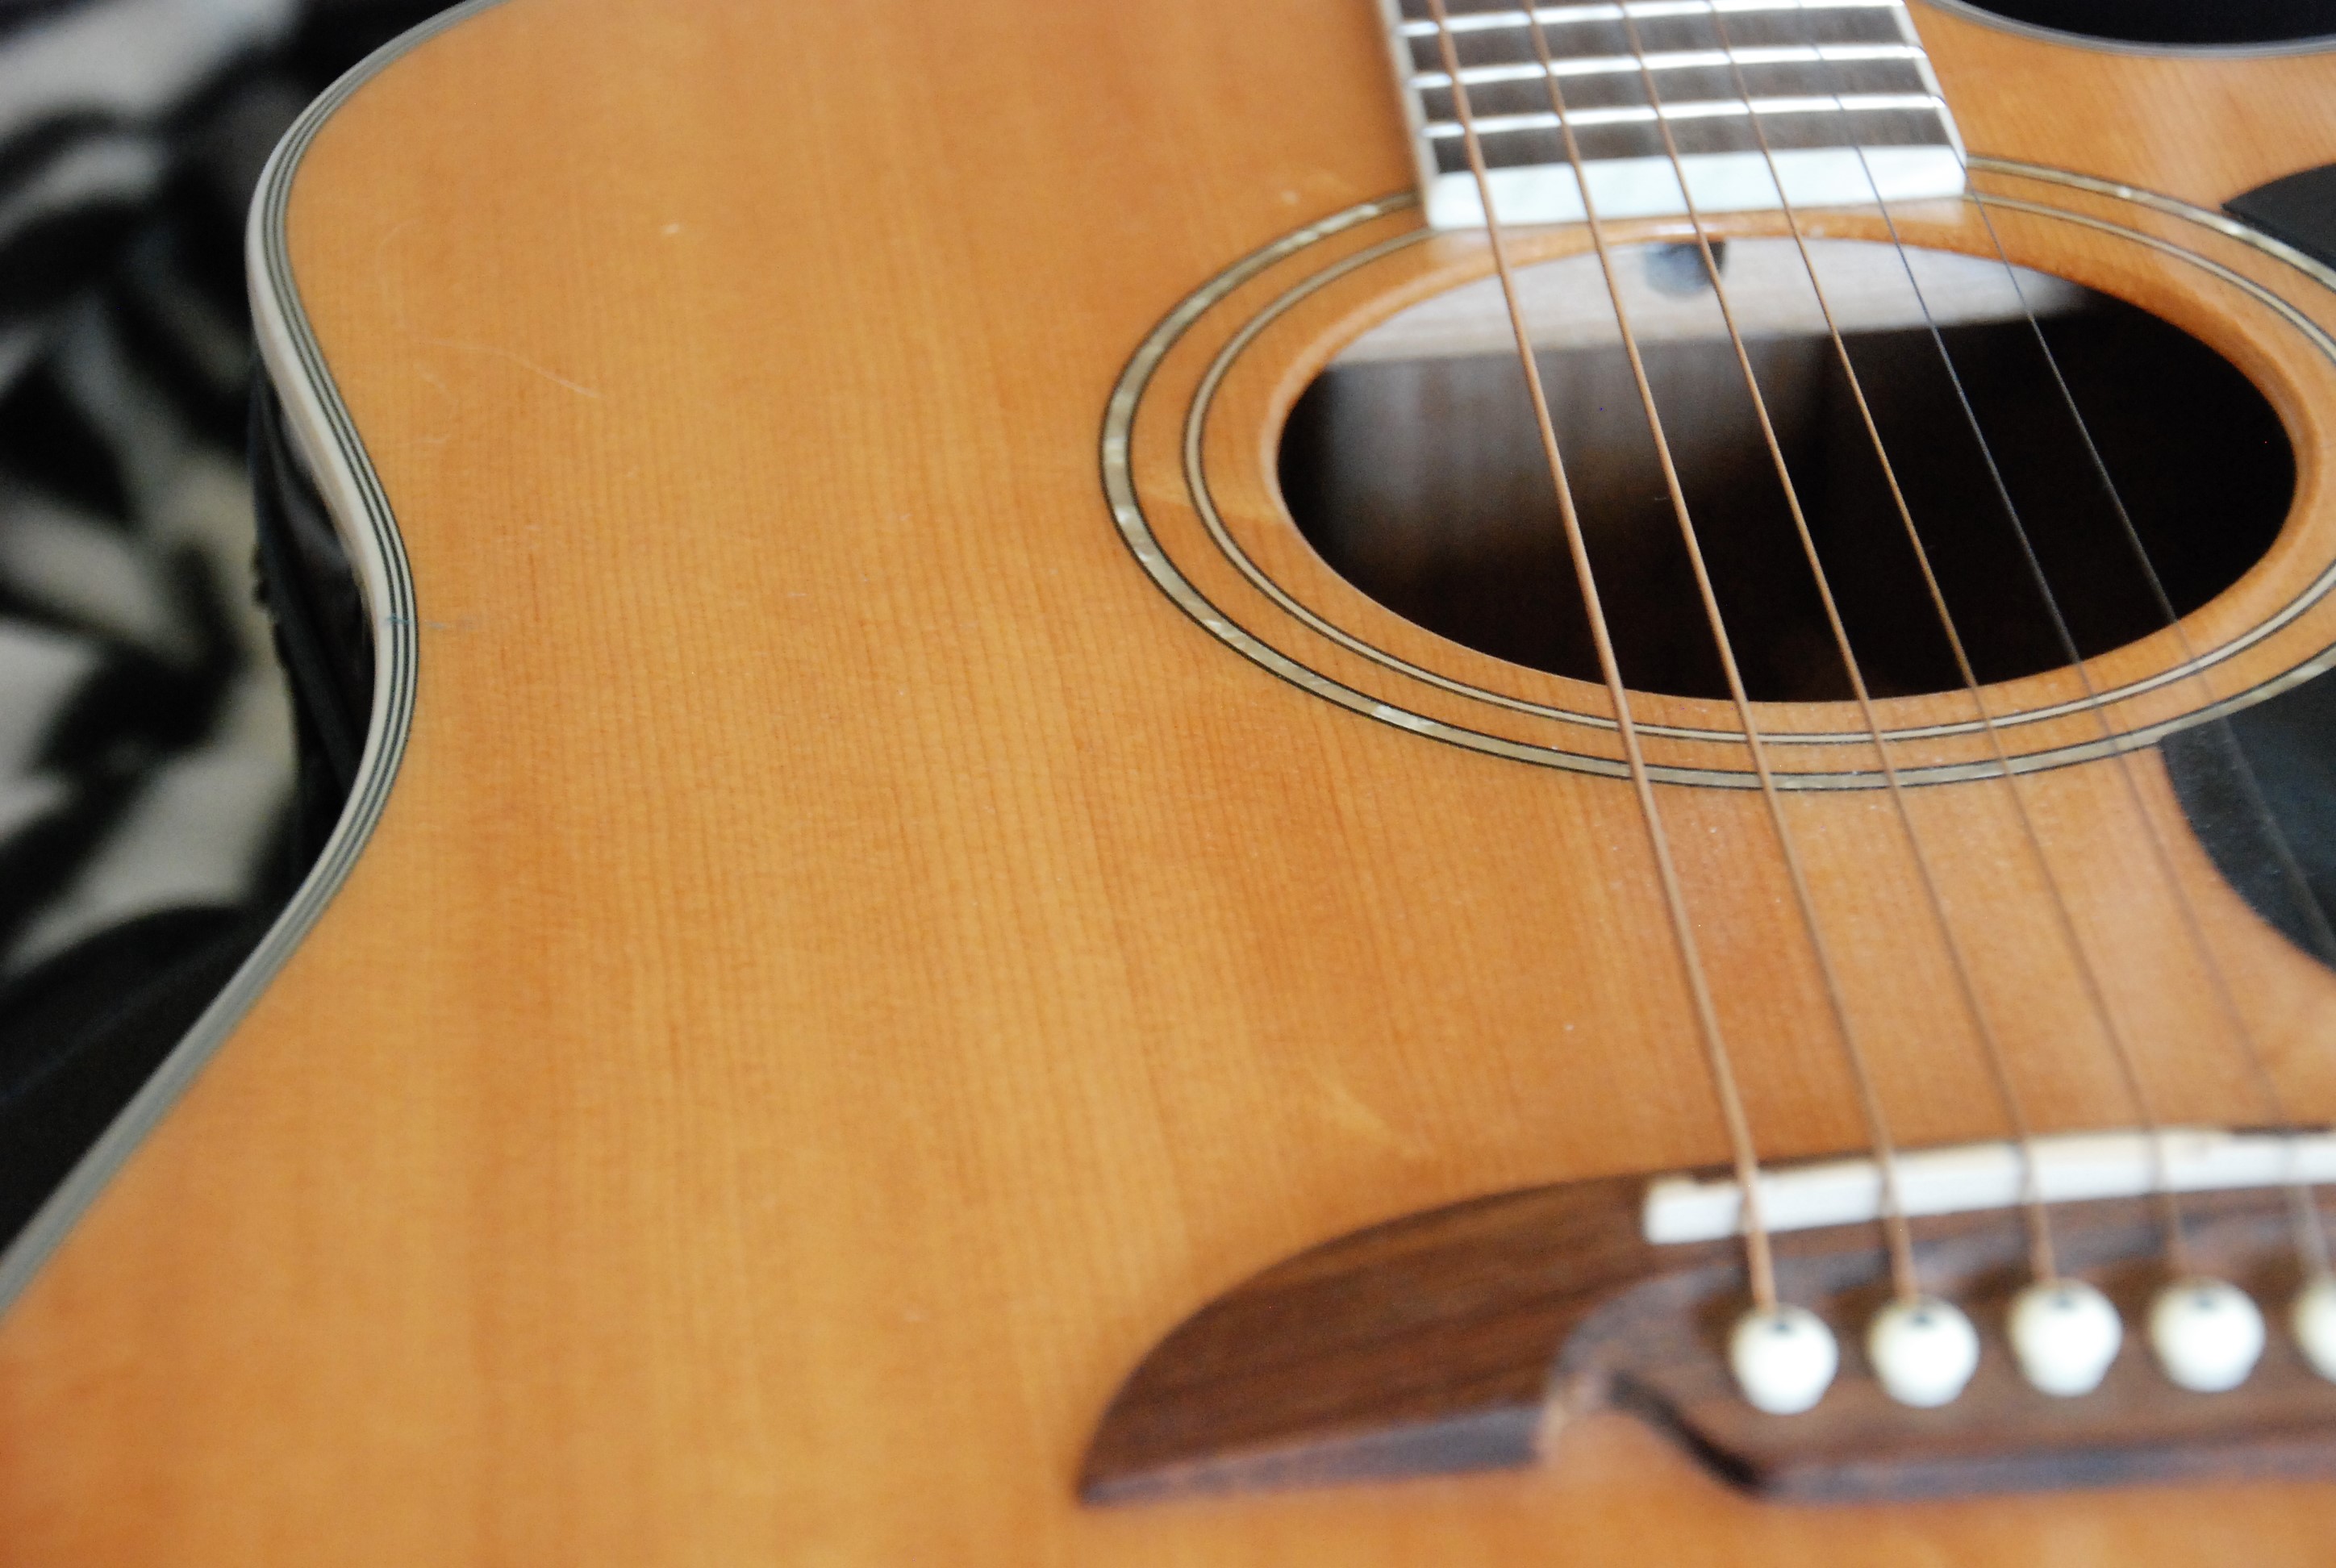 Photo of a guitar for an article about upcoming Shorewood events including an outdoor concert.